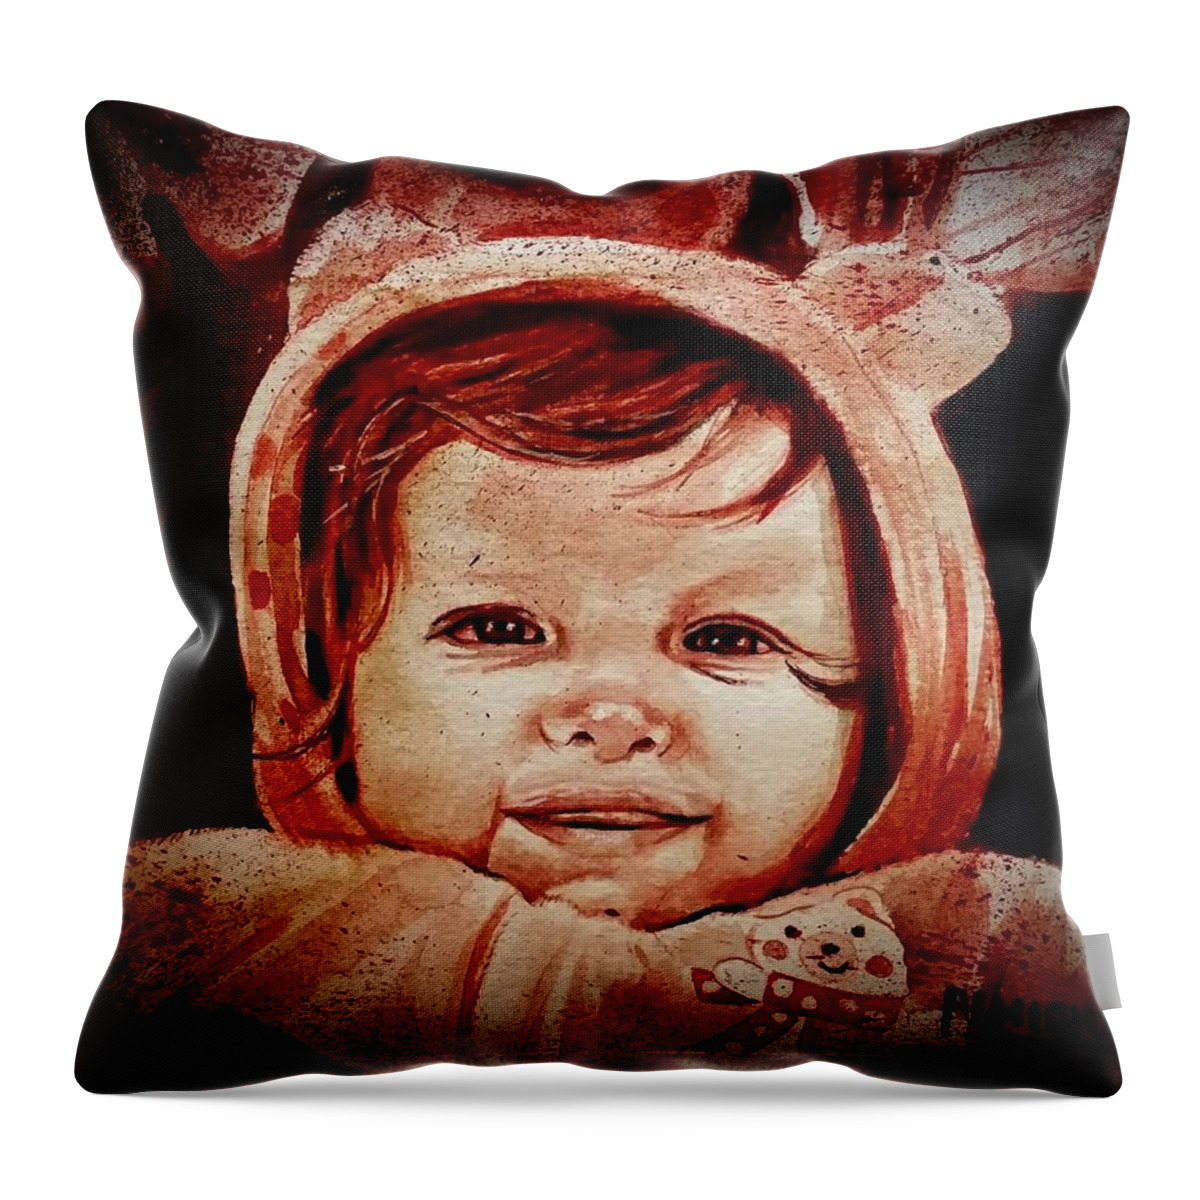 Baby Throw Pillow featuring the painting Baby Painted In Mother's Blood by Ryan Almighty